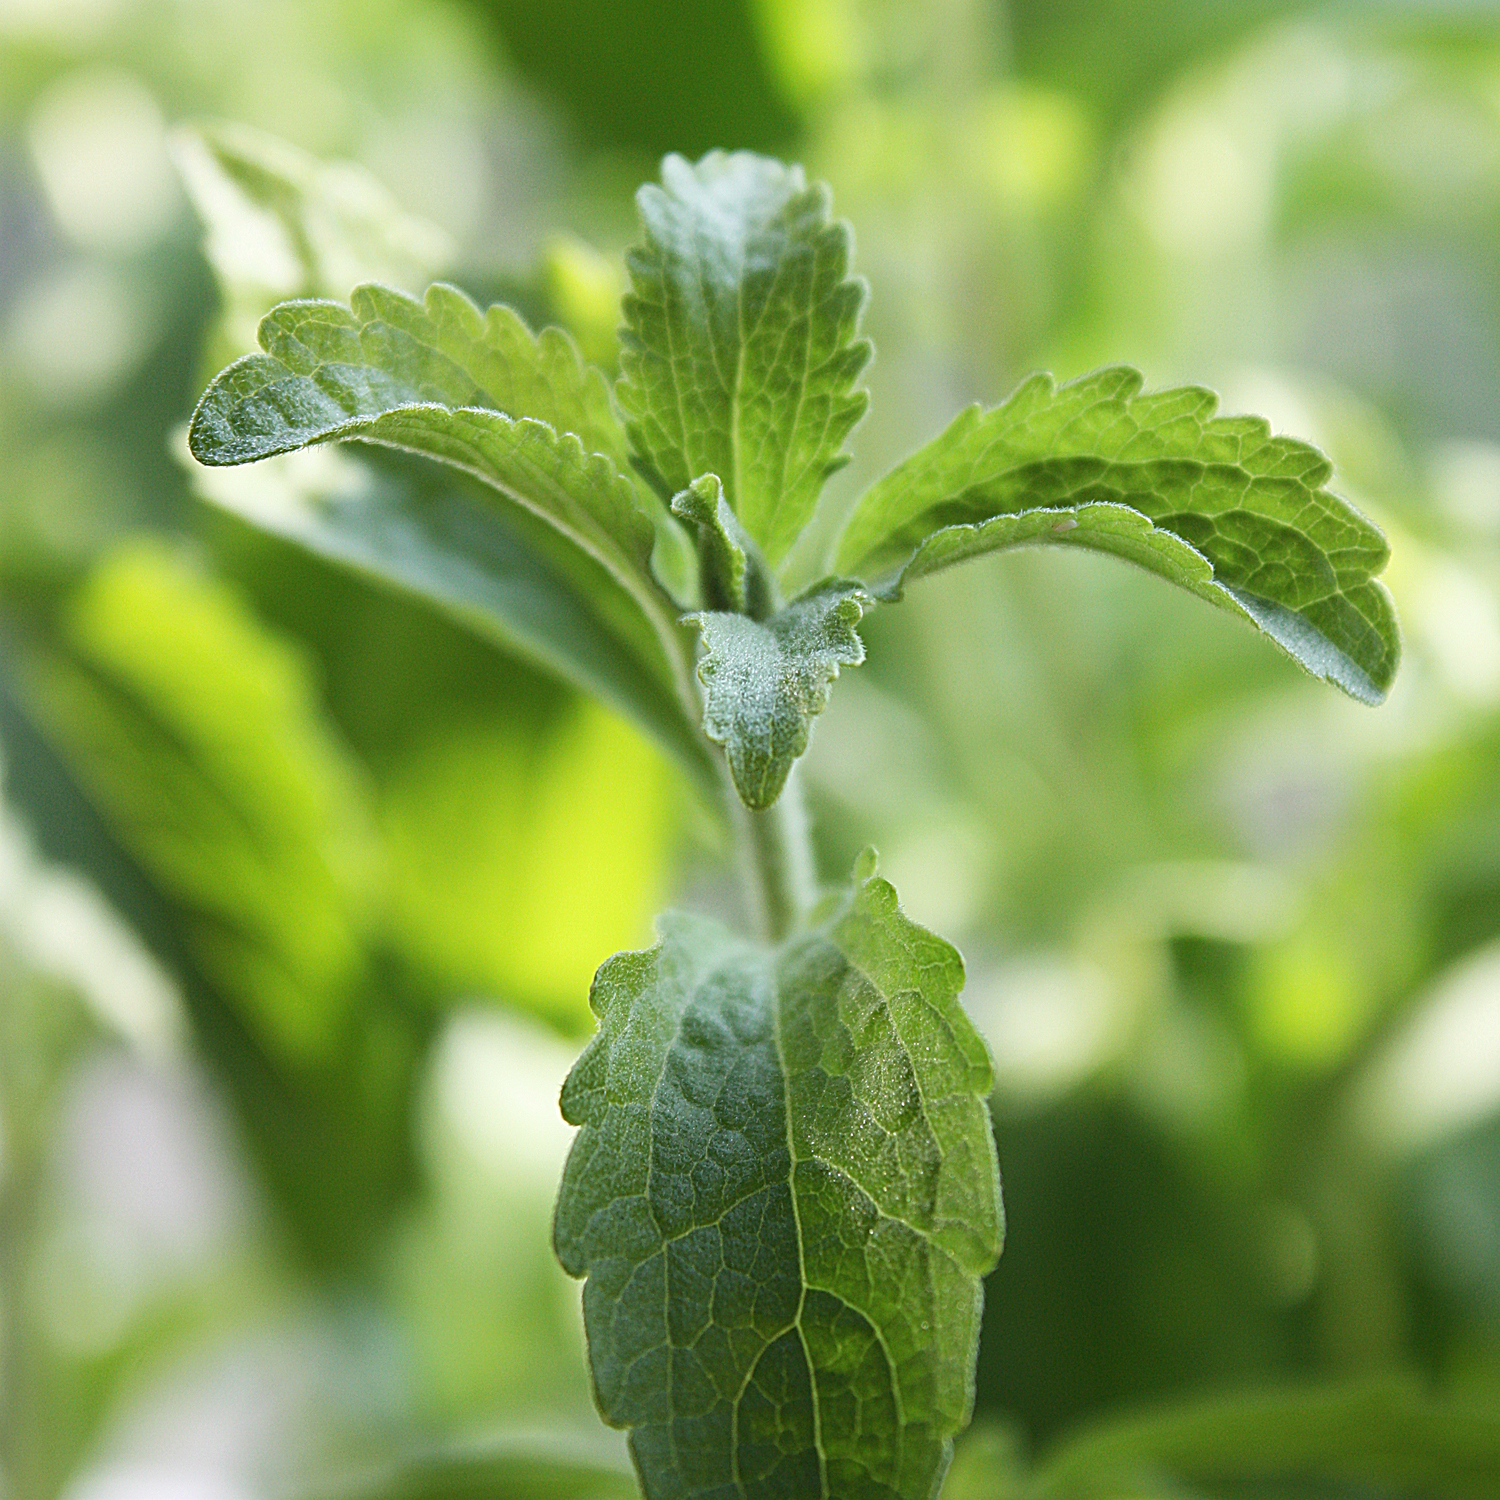 Stevia Group - The Stevia plant as the basis for our sweeteners.